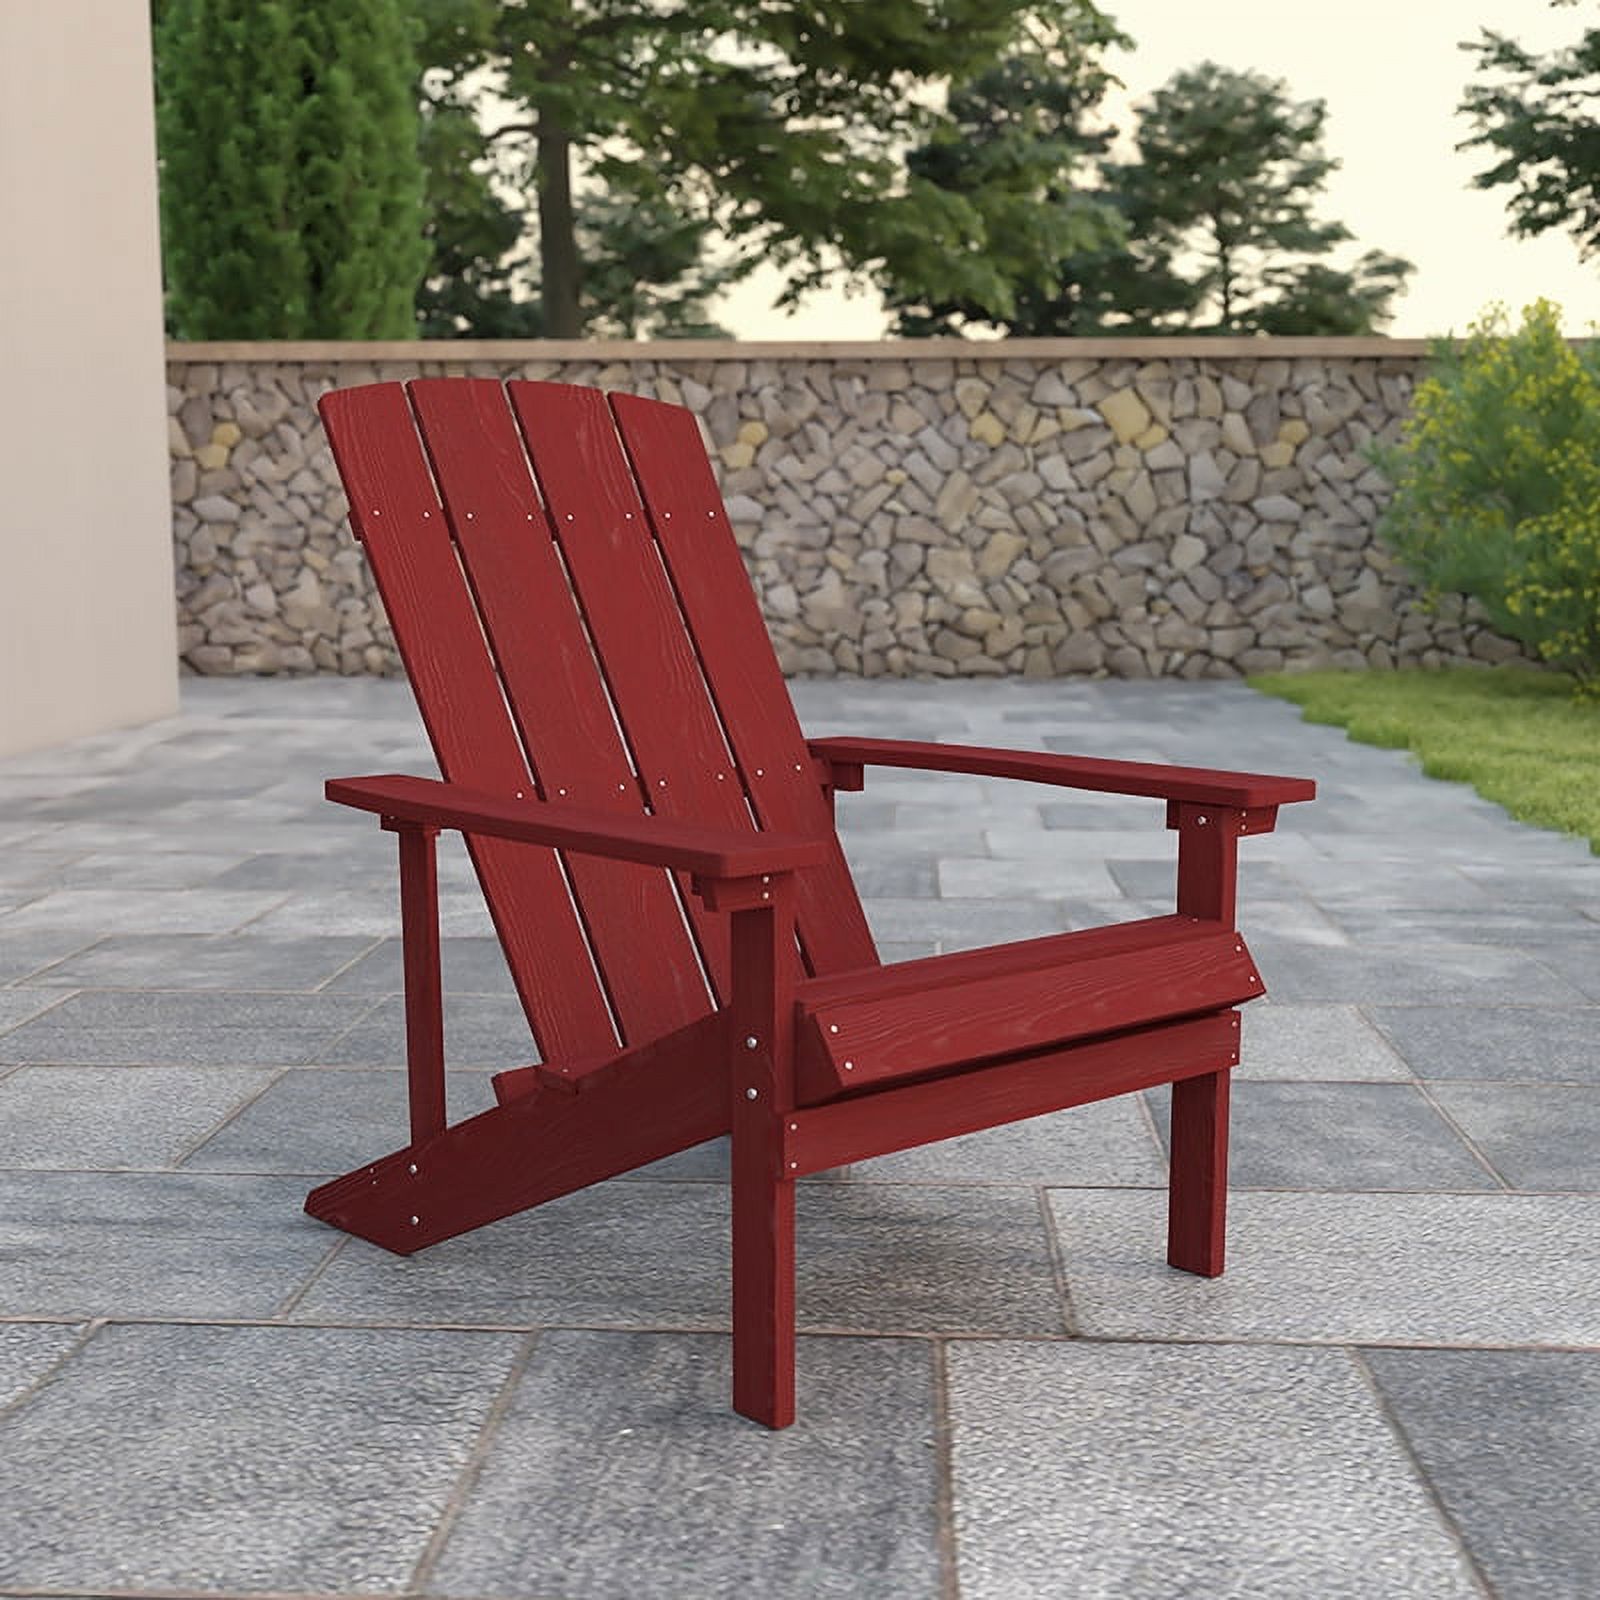 Flash Furniture Charlestown All-Weather Poly Resin Wood Adirondack Chair in Red - image 4 of 12